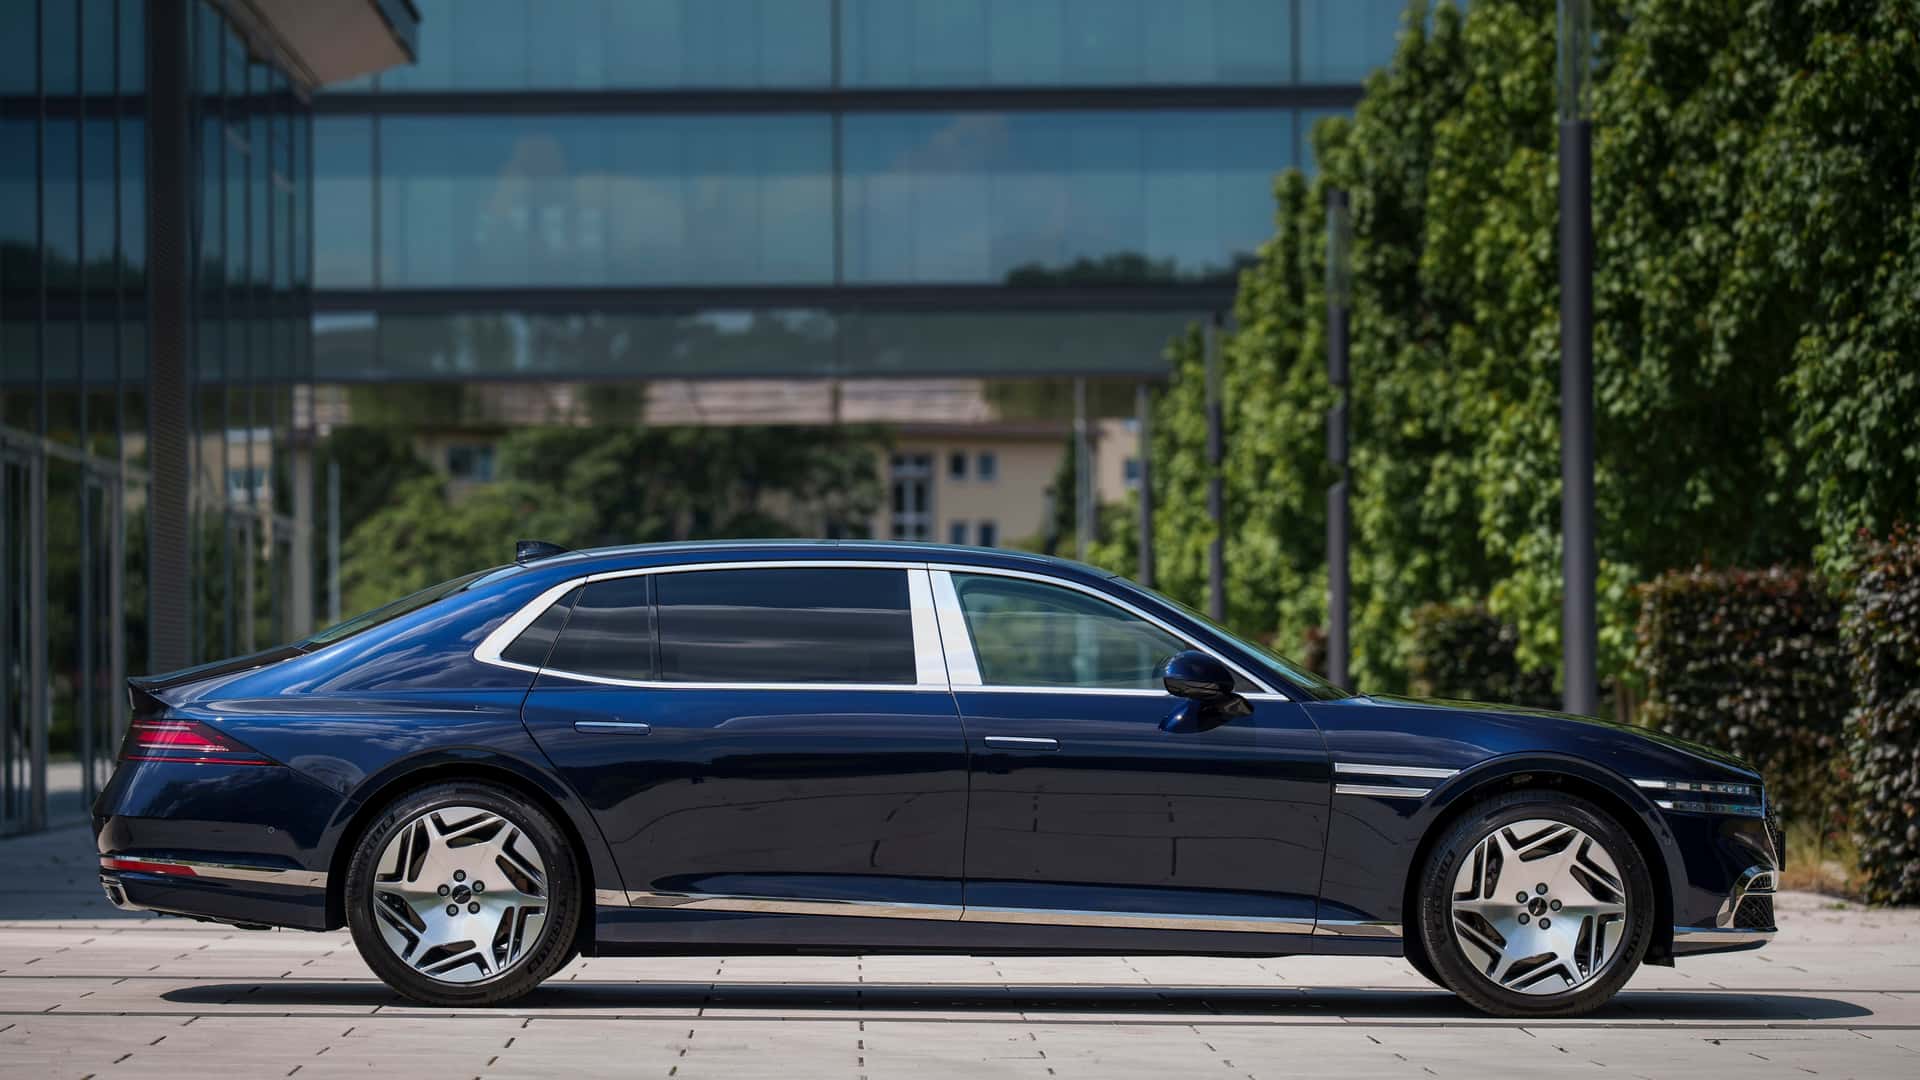 Luxury Elevated Genesis Introduces the Exquisite G90 to Europe Buy